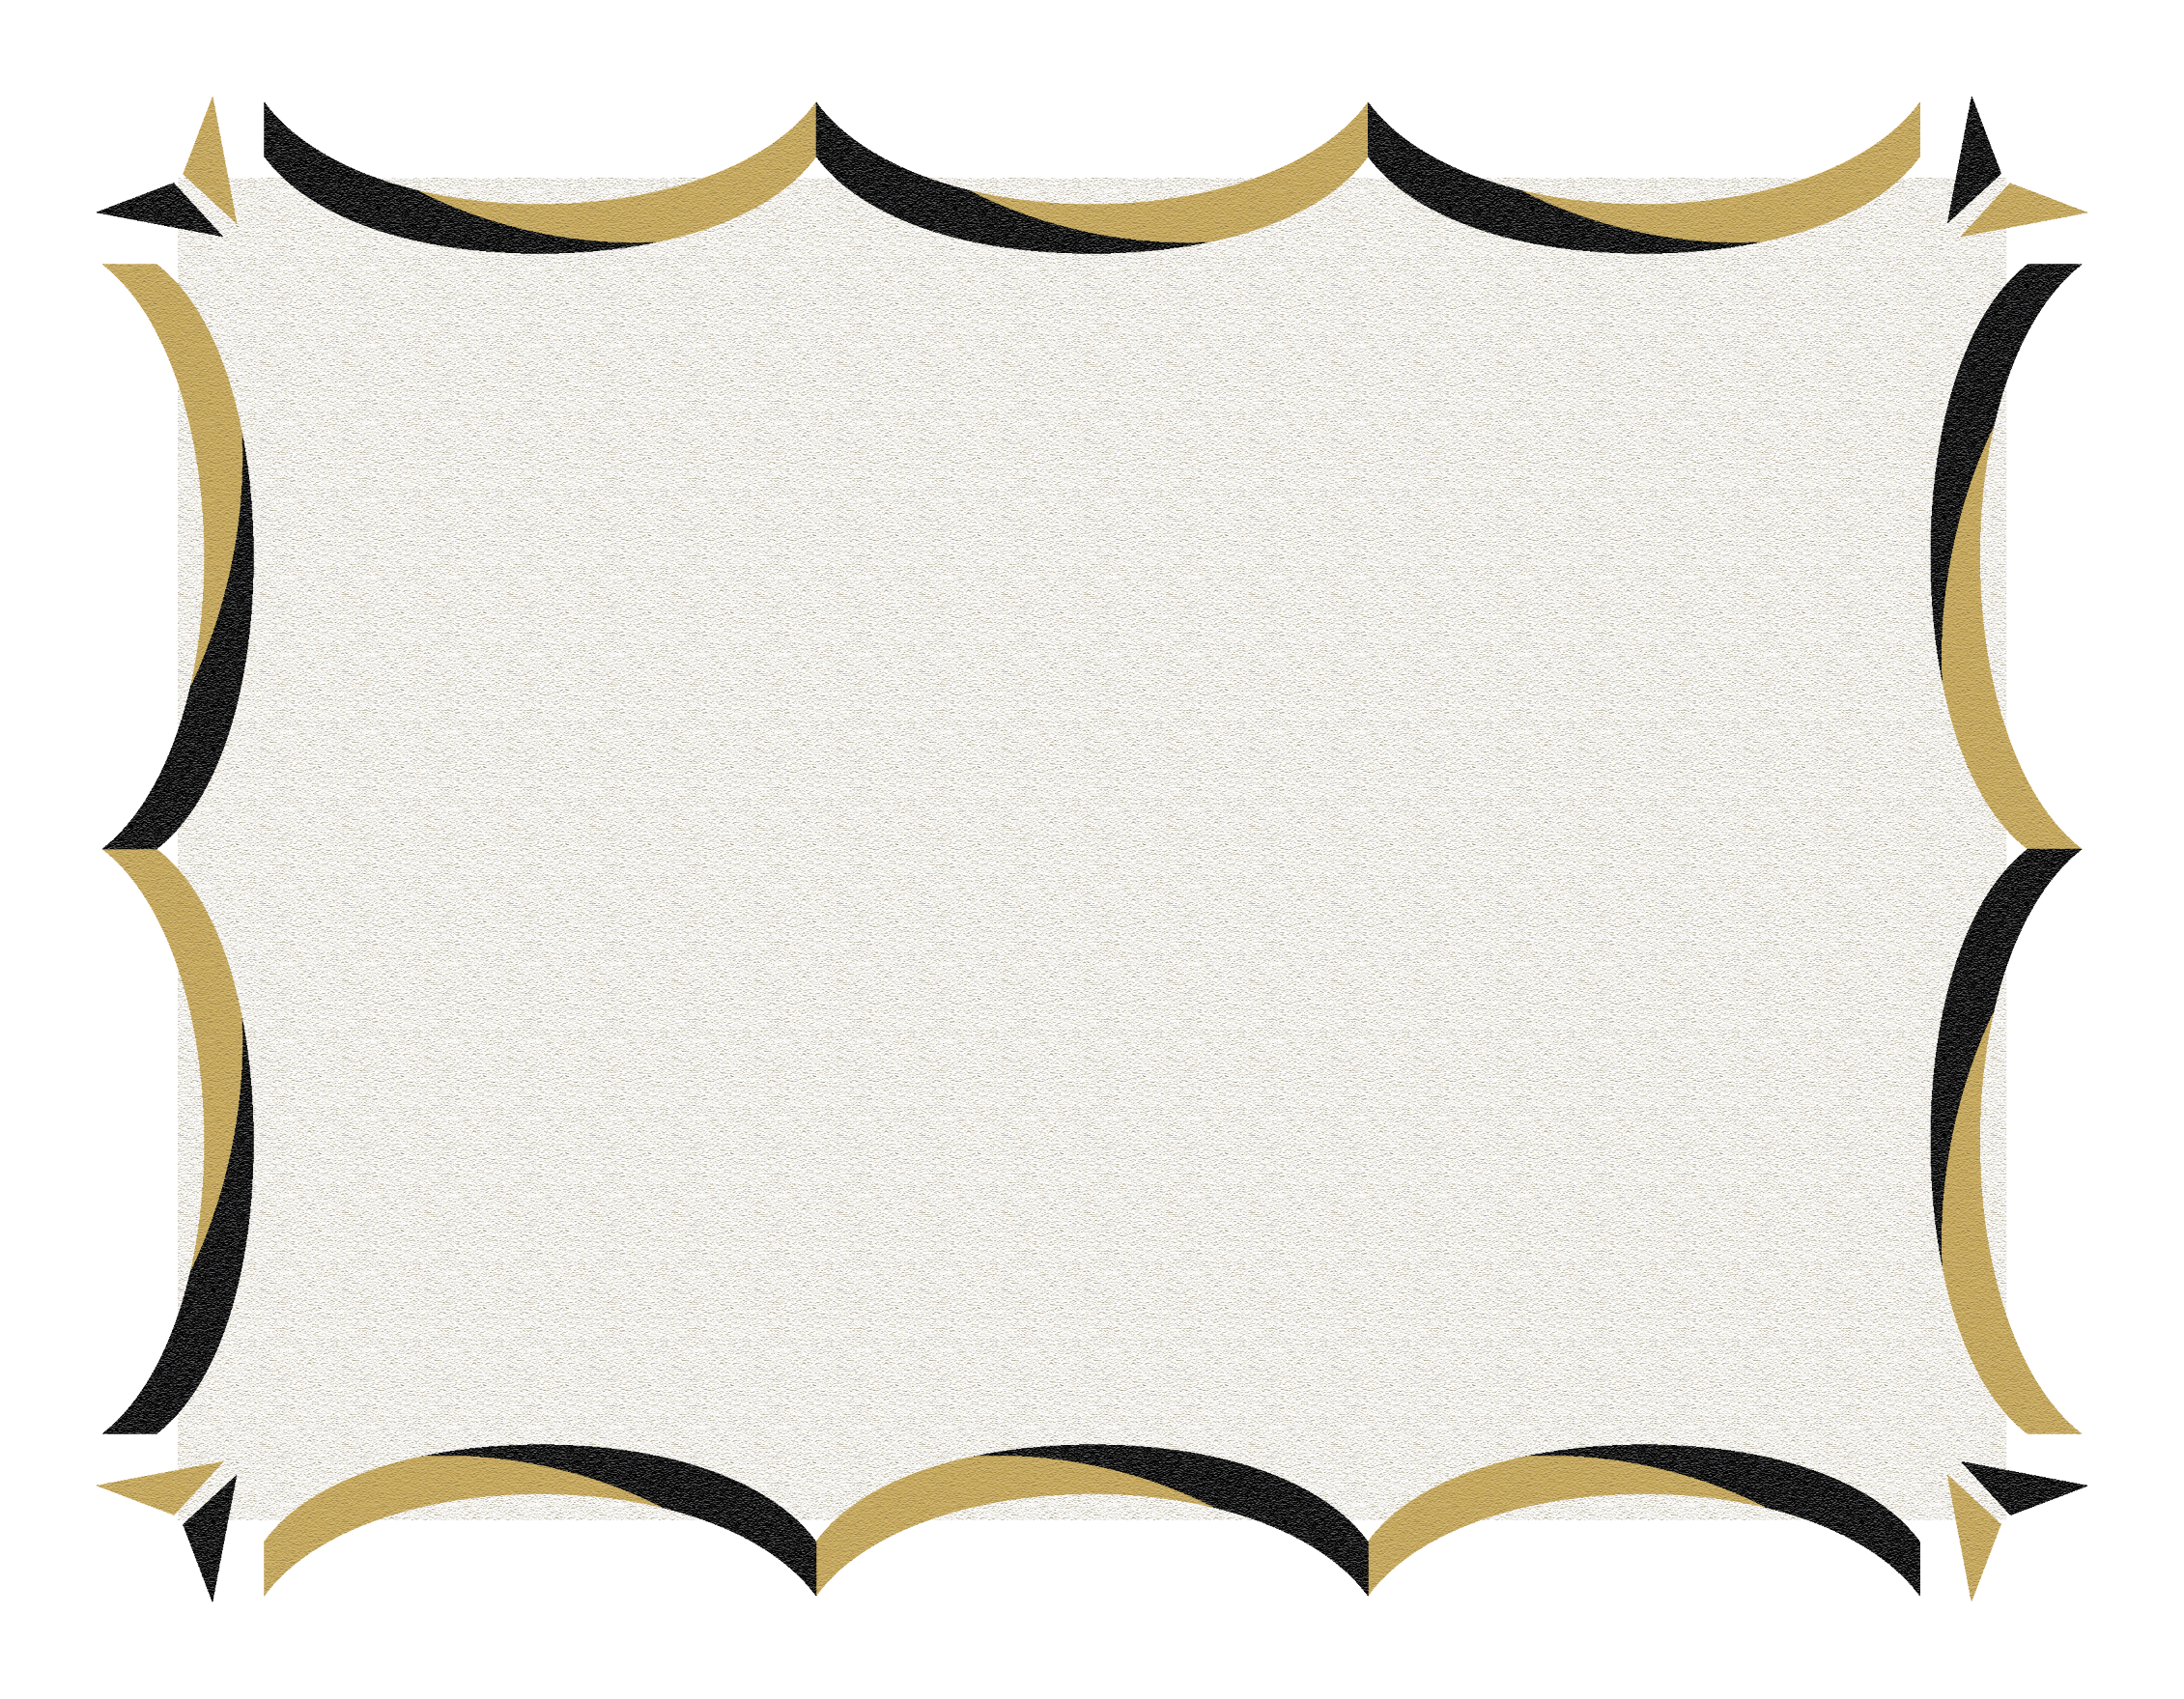 Gold Certificate Page Borders Clipart Best